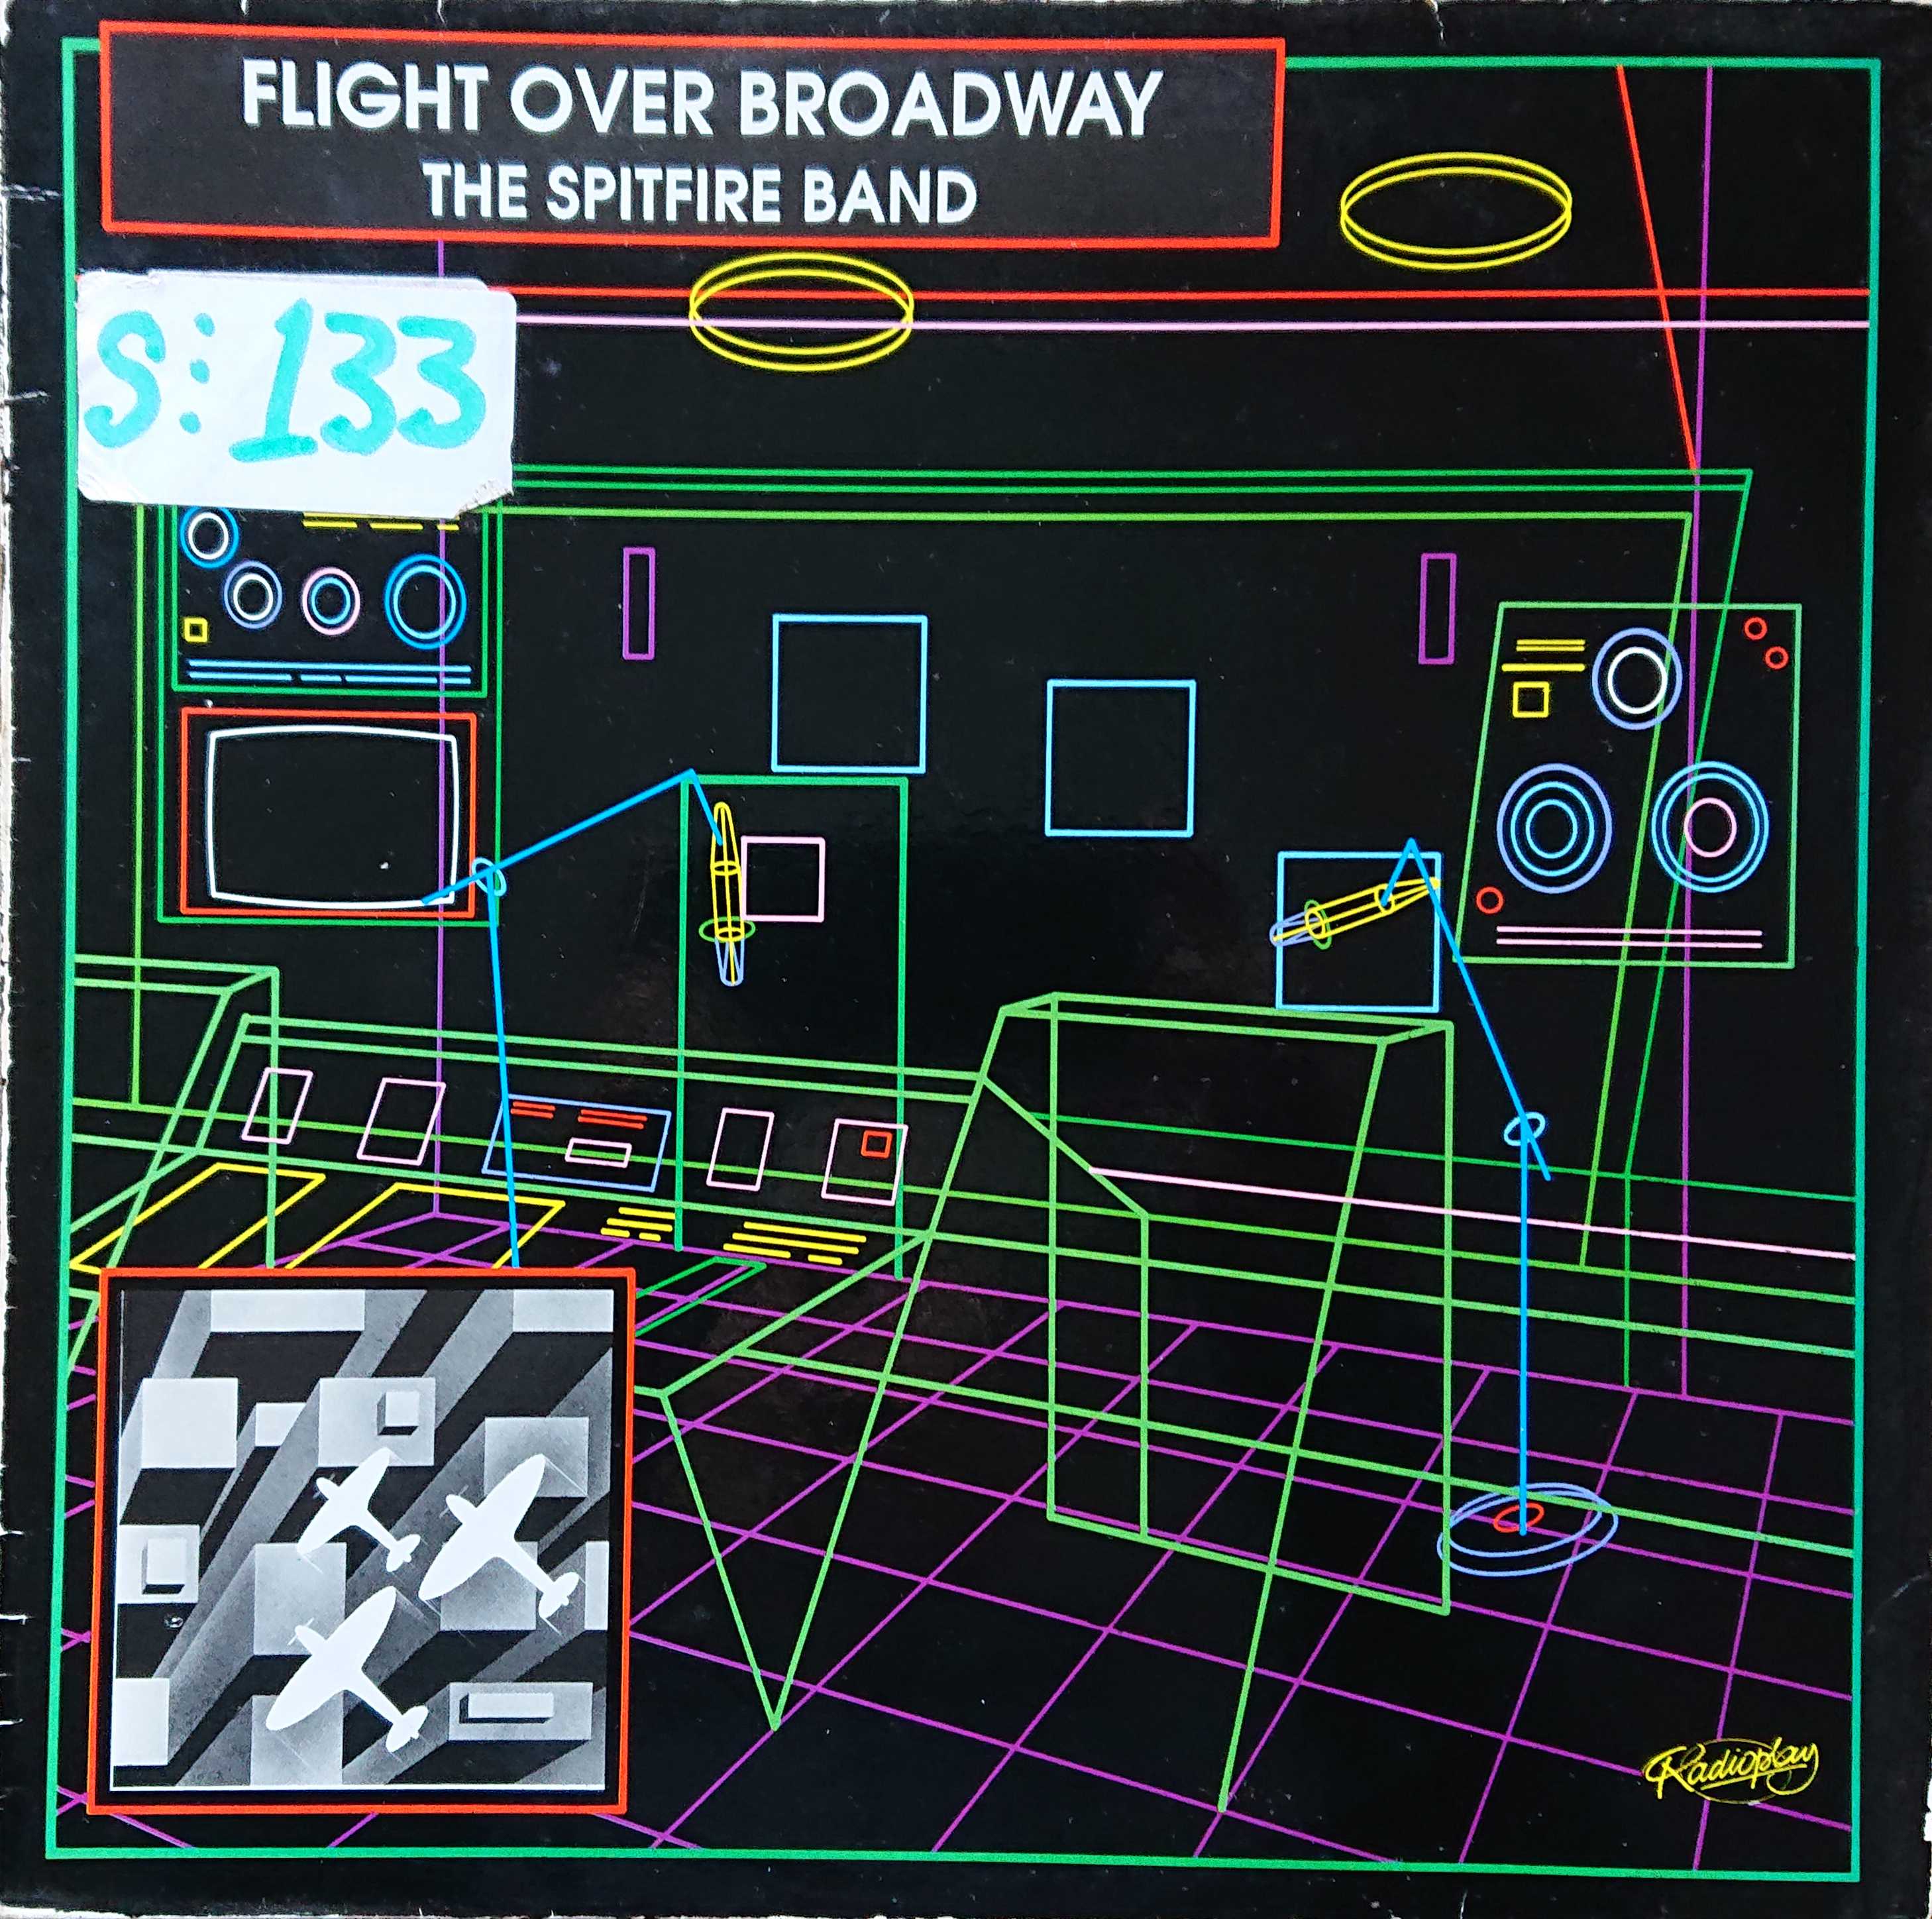 Picture of TAIR 87037 Flight over Broadway by artist The Spitfire Band from the BBC albums - Records and Tapes library